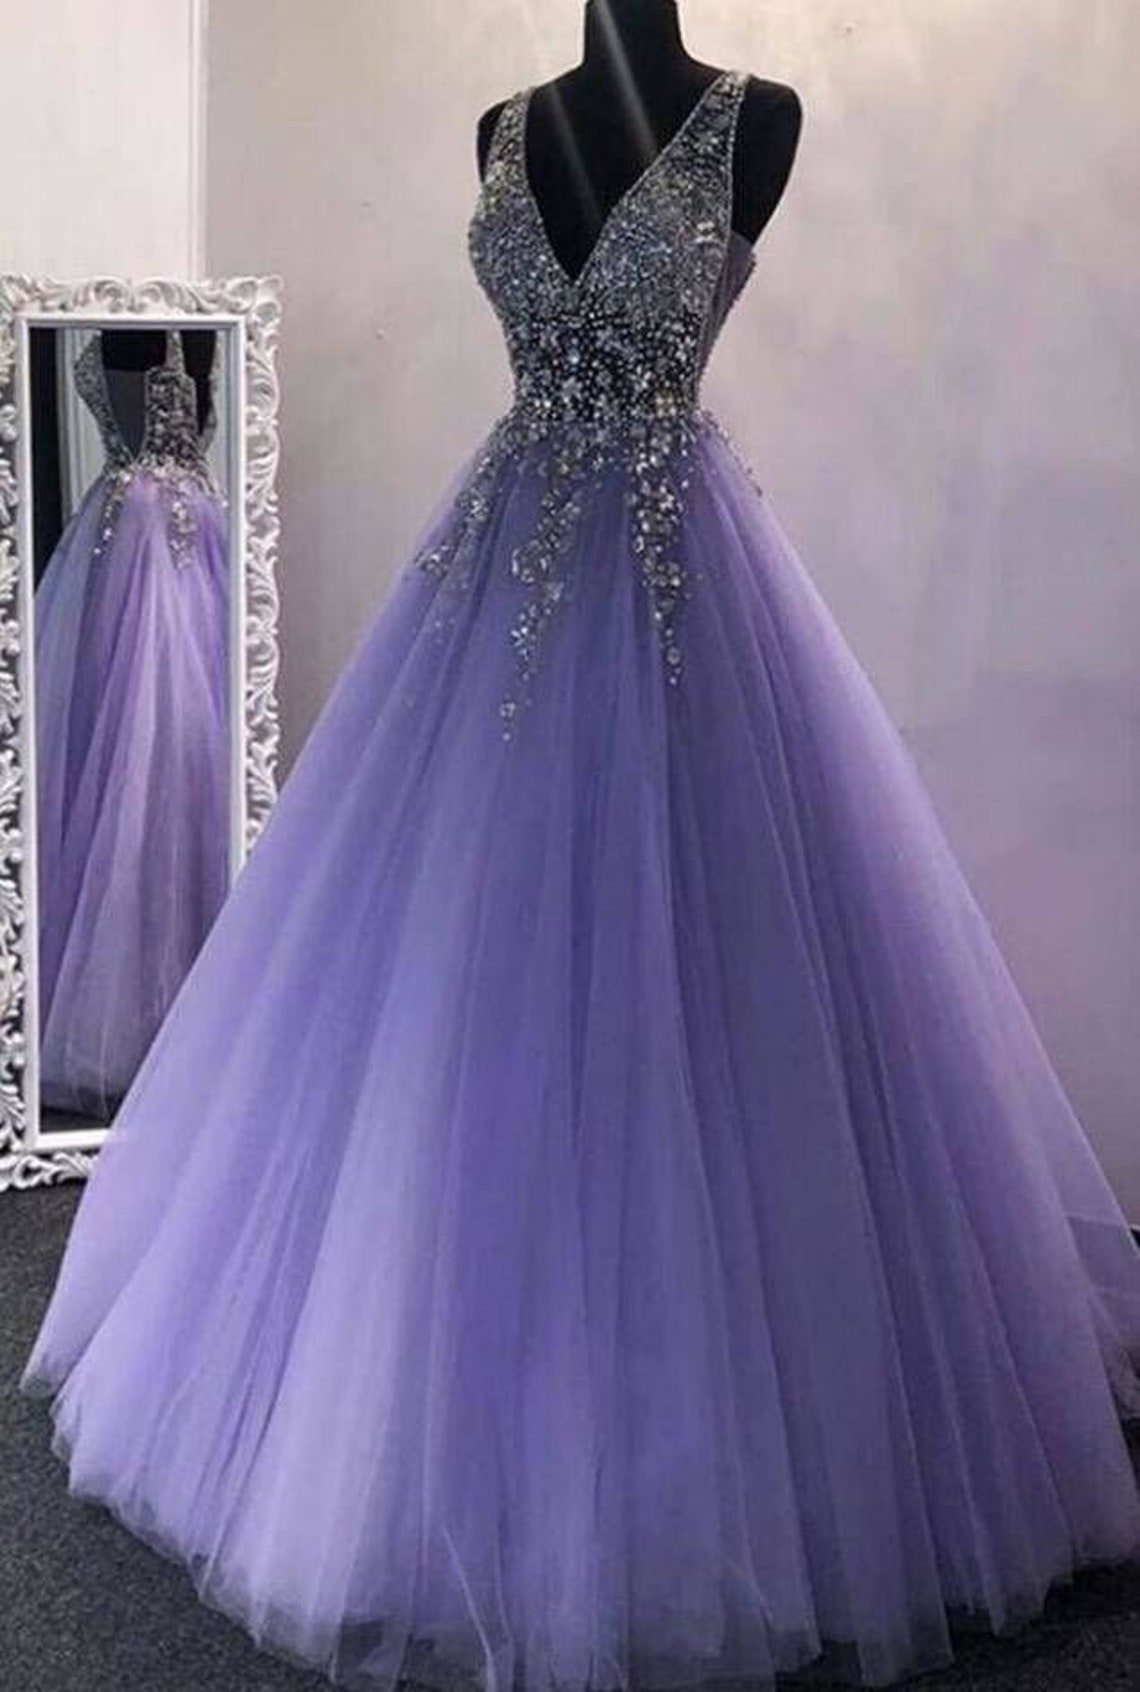 Prom Dress With Beading Evening Gown Graduation Party Dress - Etsy